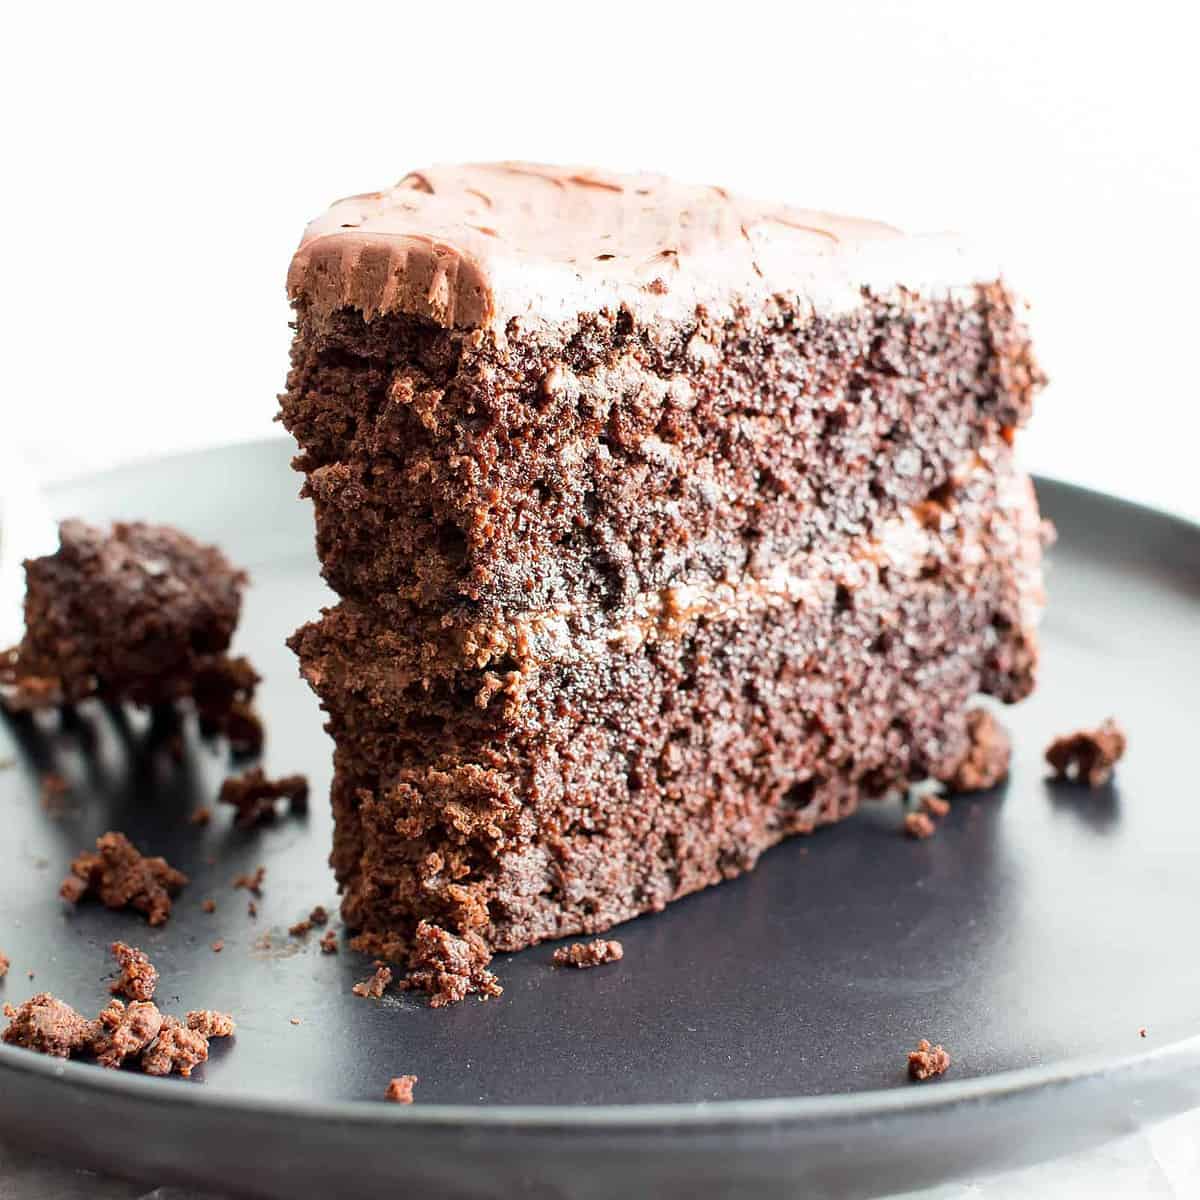 Indulge in Decadence with Our Gluten-Free Chocolate Cake!